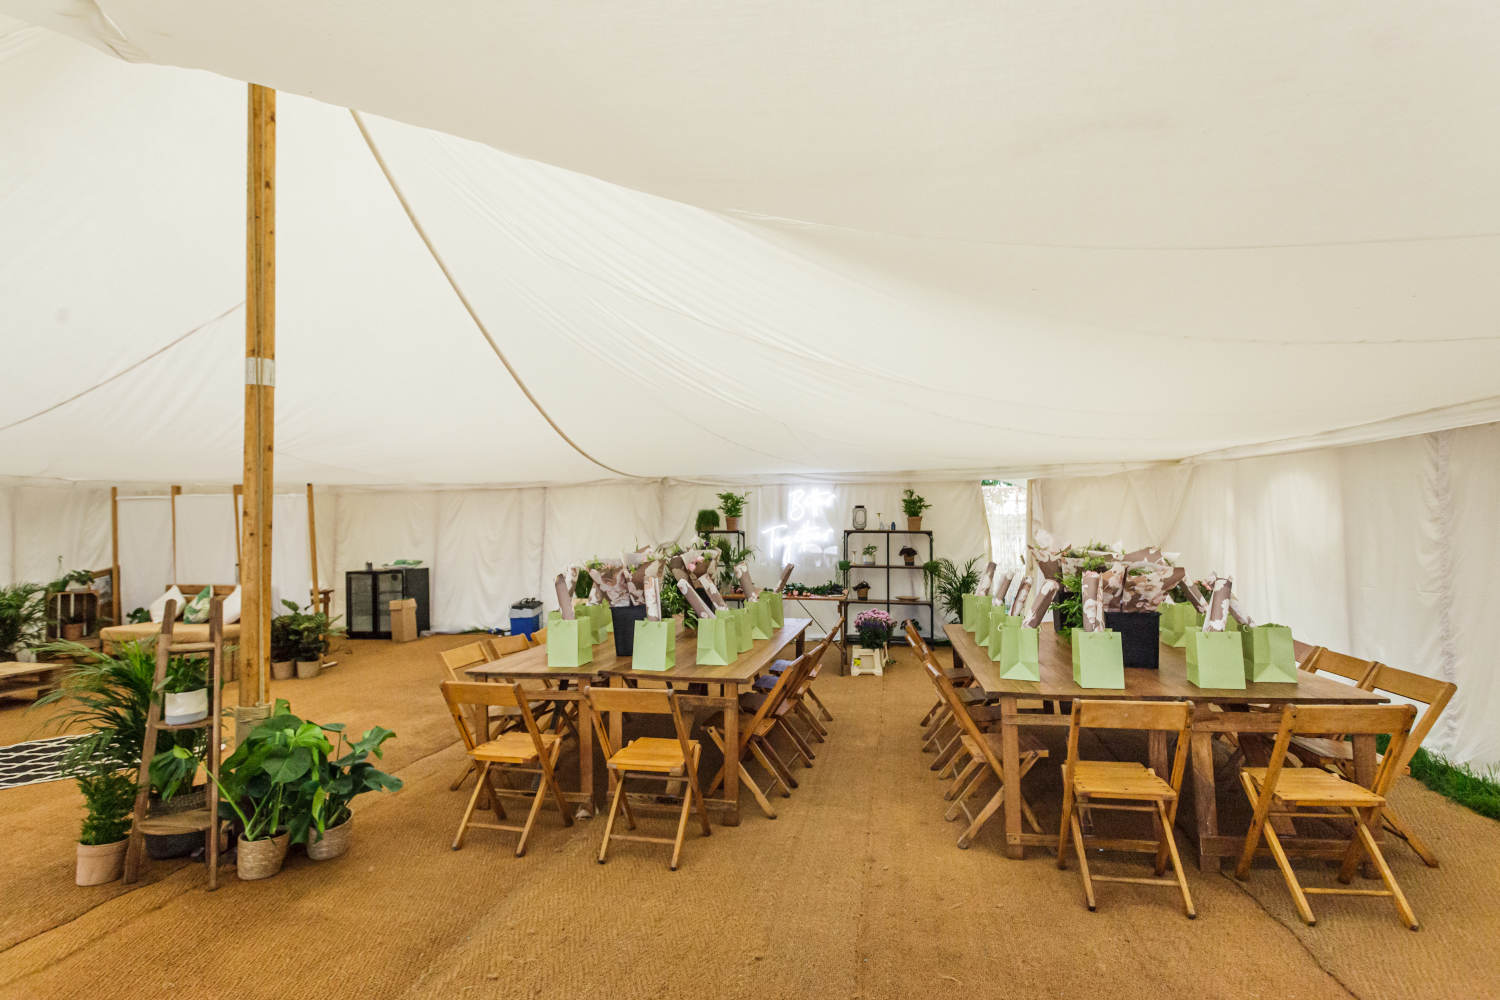 Corporate Event Tent Hire - Unique Marquees for Events